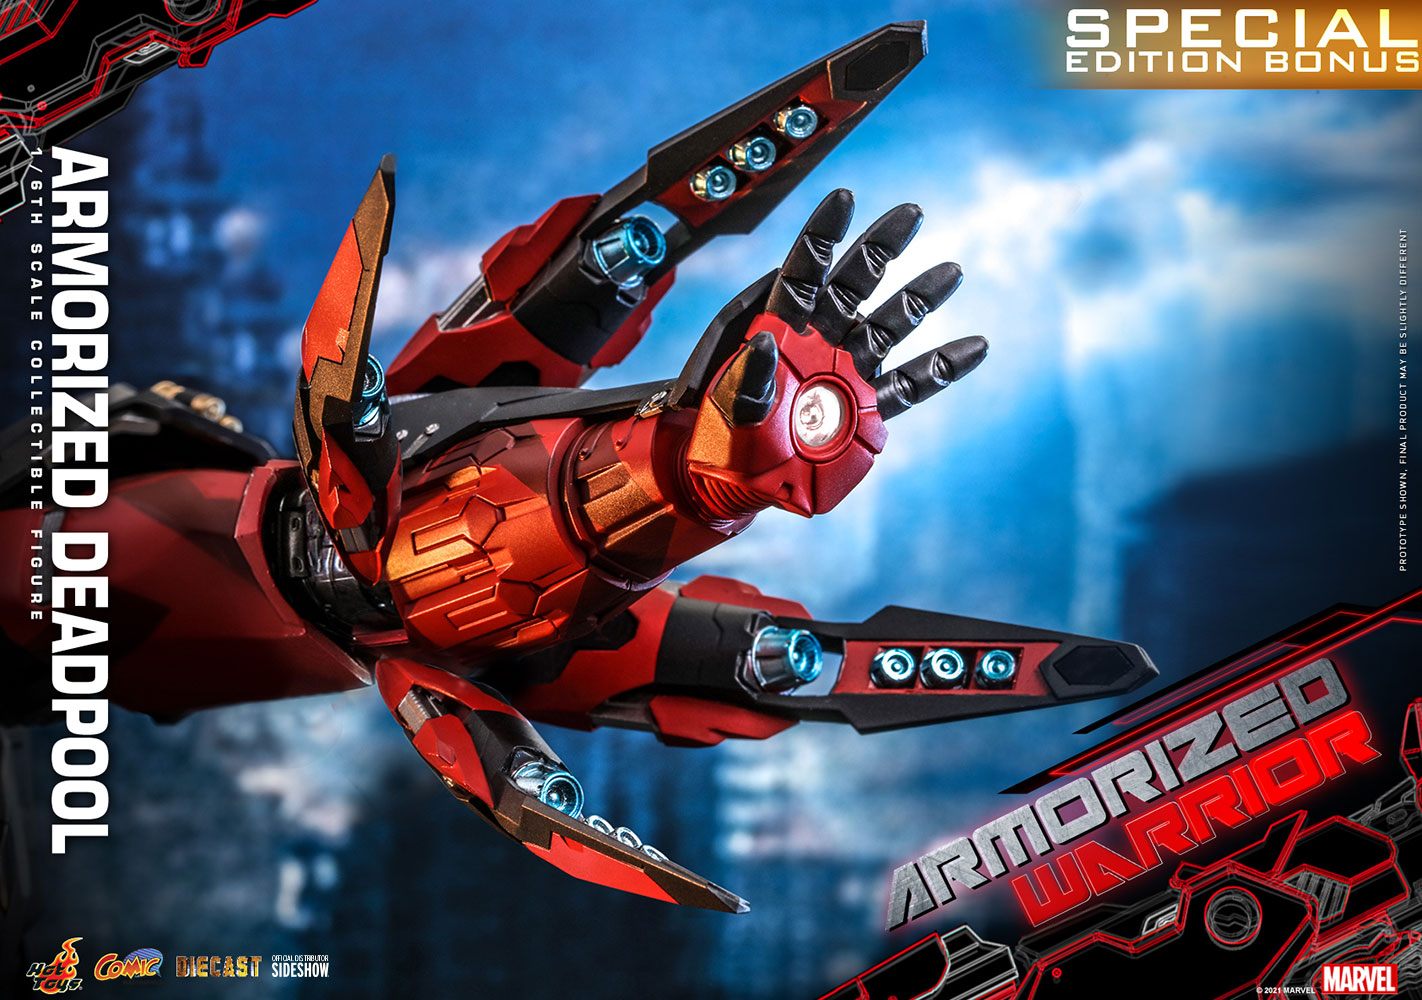 Armorized Deadpool (Special Edition) Exclusive Edition - Prototype Shown